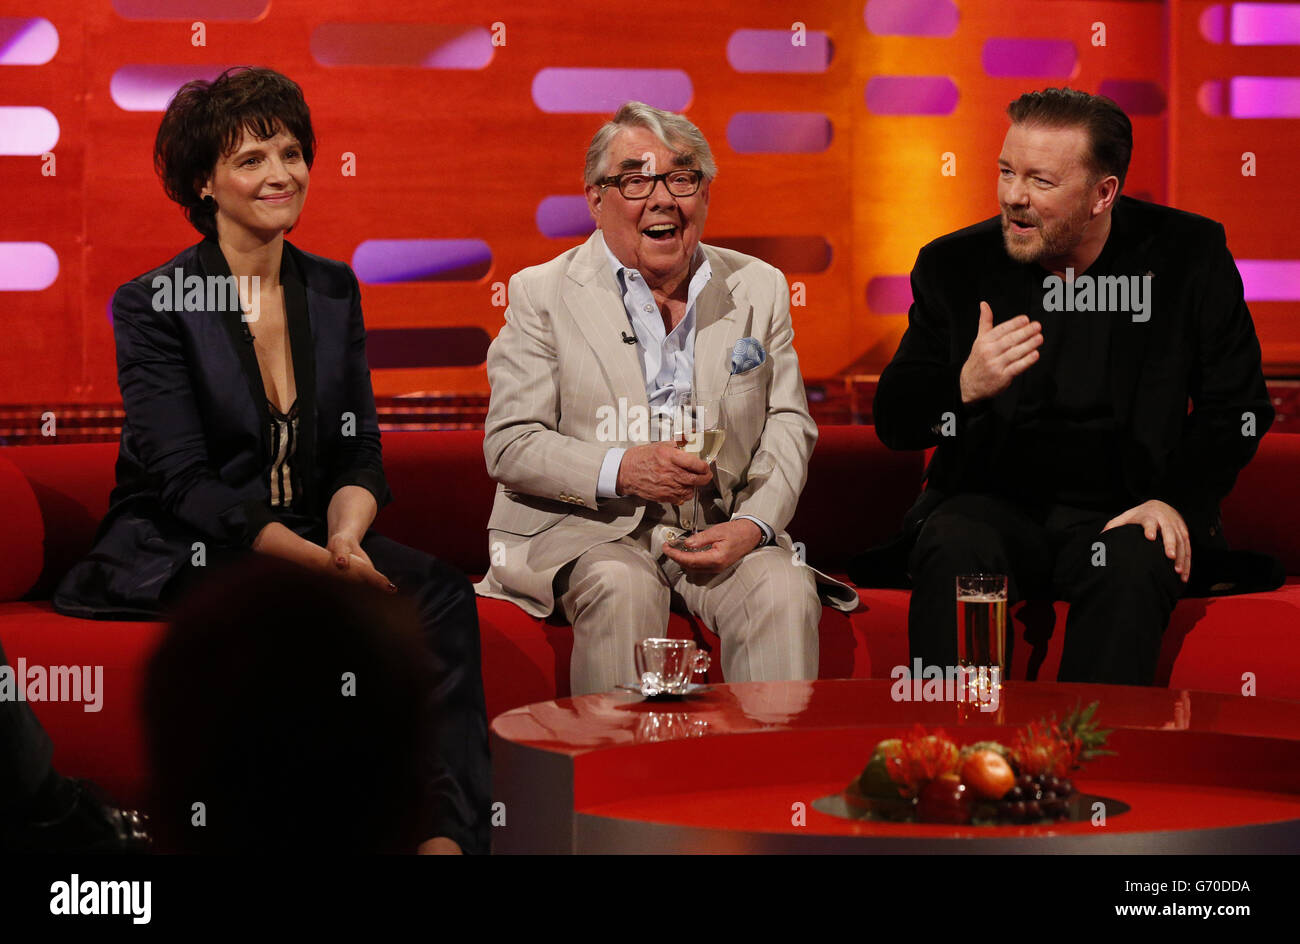 (left to right) Juliette Binoche, Ronnie Corbett, and Ricky Gervais during the filming of the Graham Norton Show at the London Studios, south London, to be aired on BBC One on Friday April 18. Stock Photo